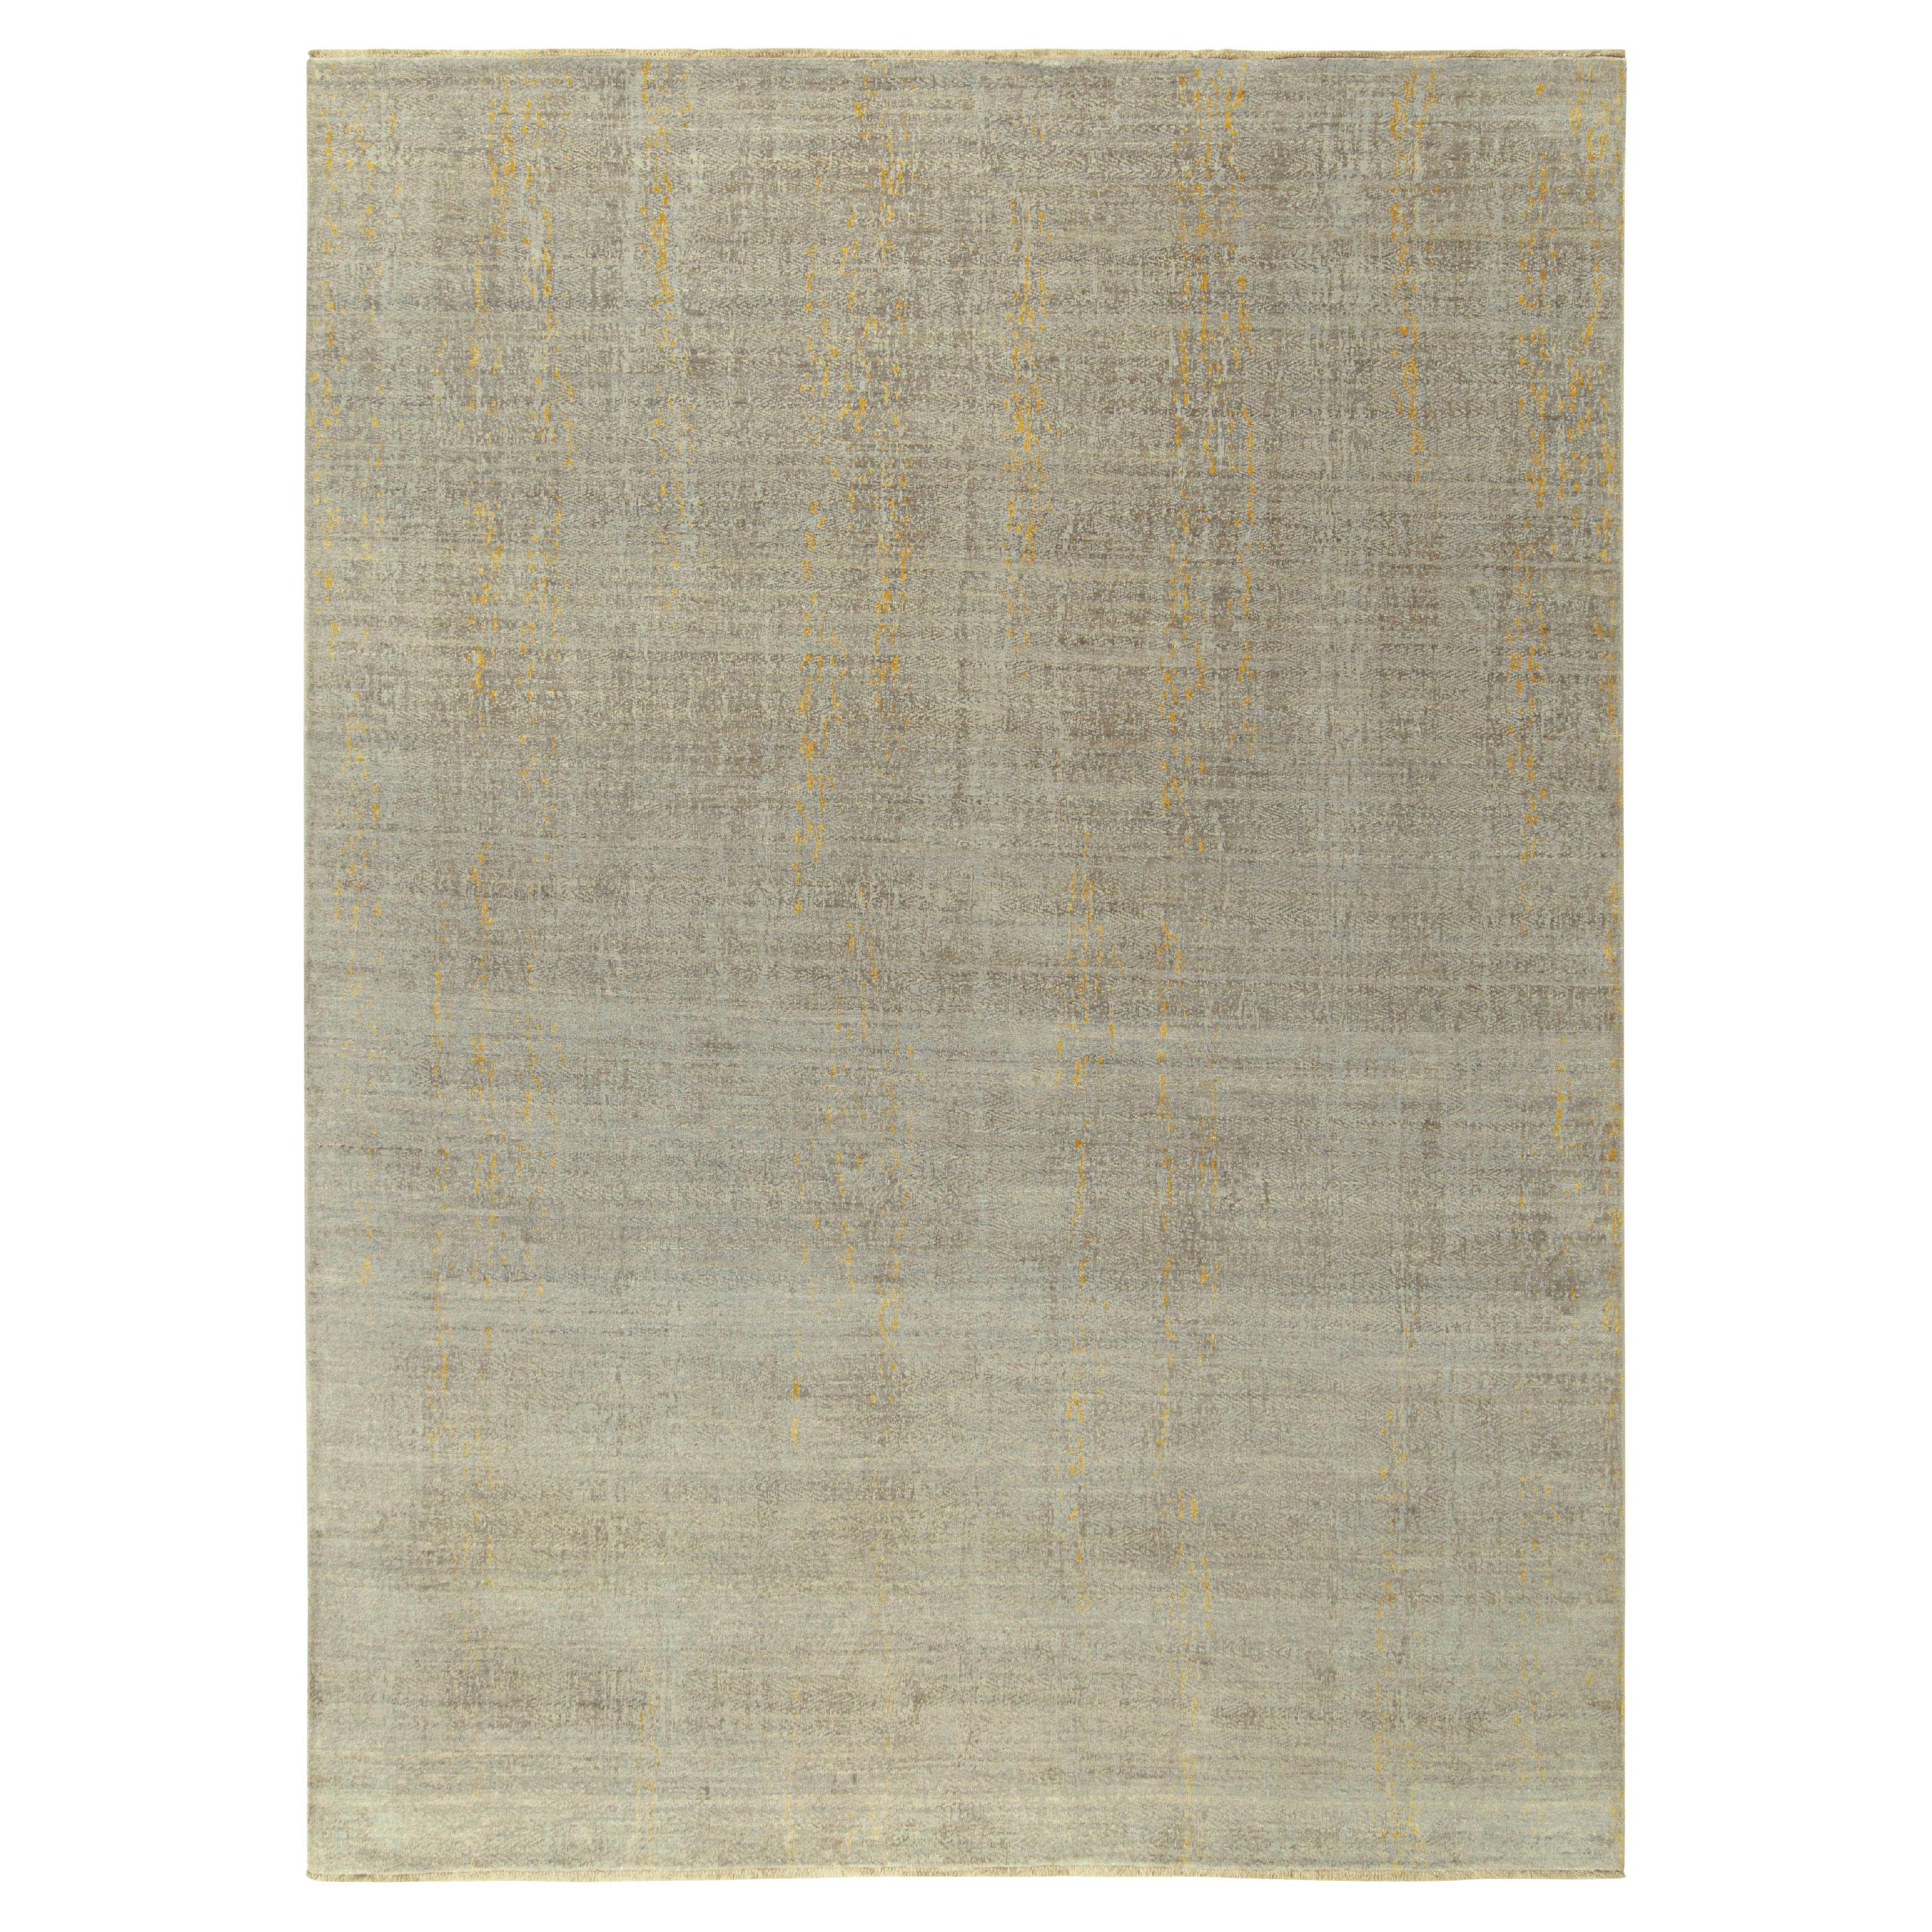 Rug & Kilim’s Contemporary Abstract Rug in Blue, Silver-Gray and Gold